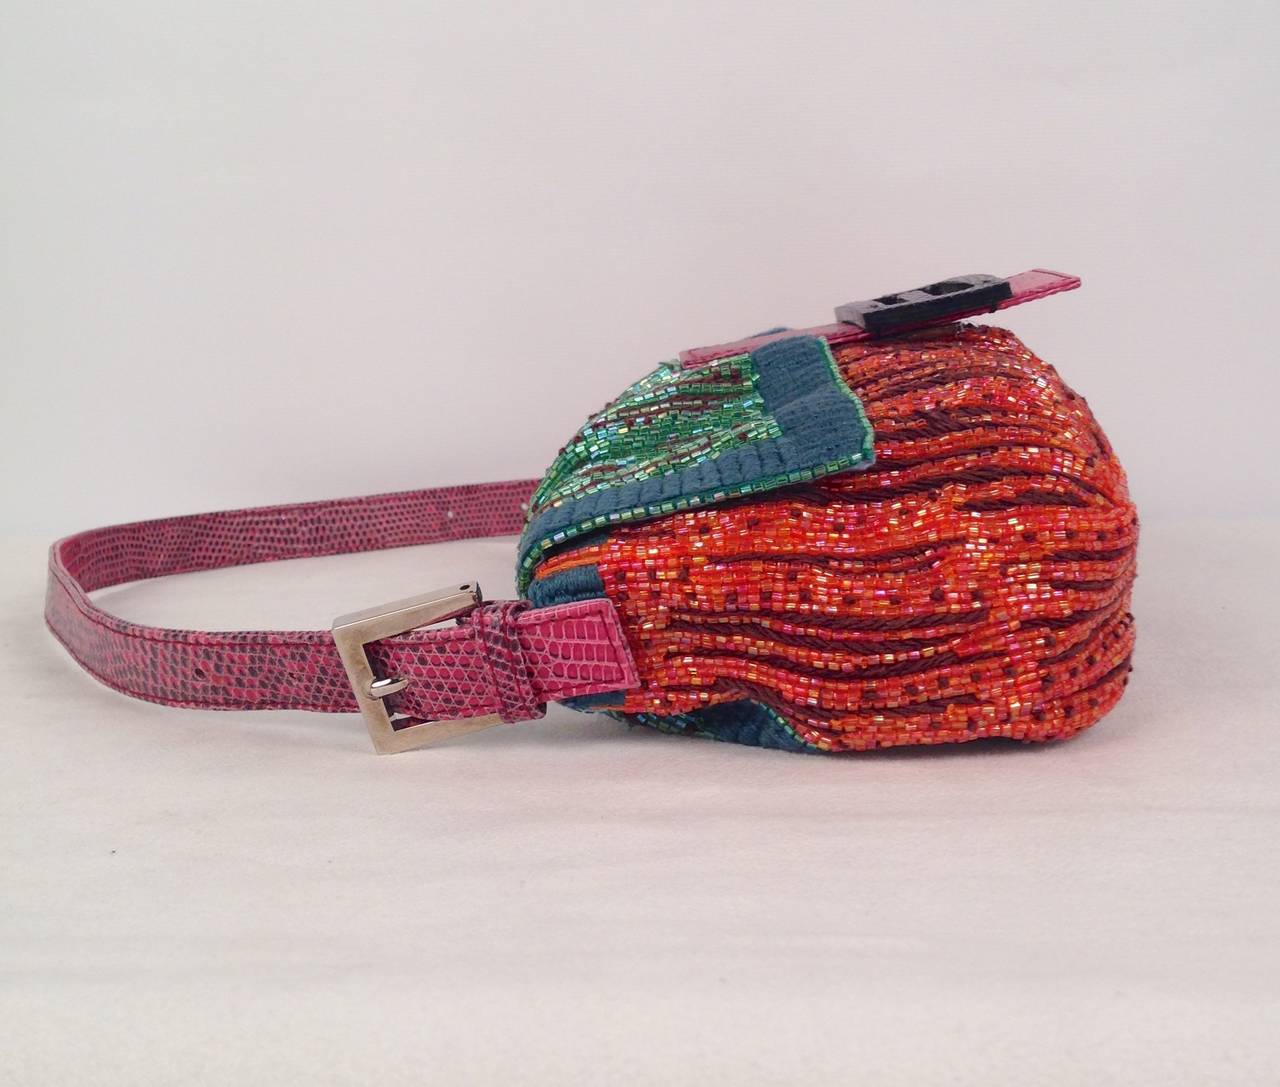 Fendi Mixed-Media Beaded Baguette Bag In Excellent Condition For Sale In Palm Beach, FL